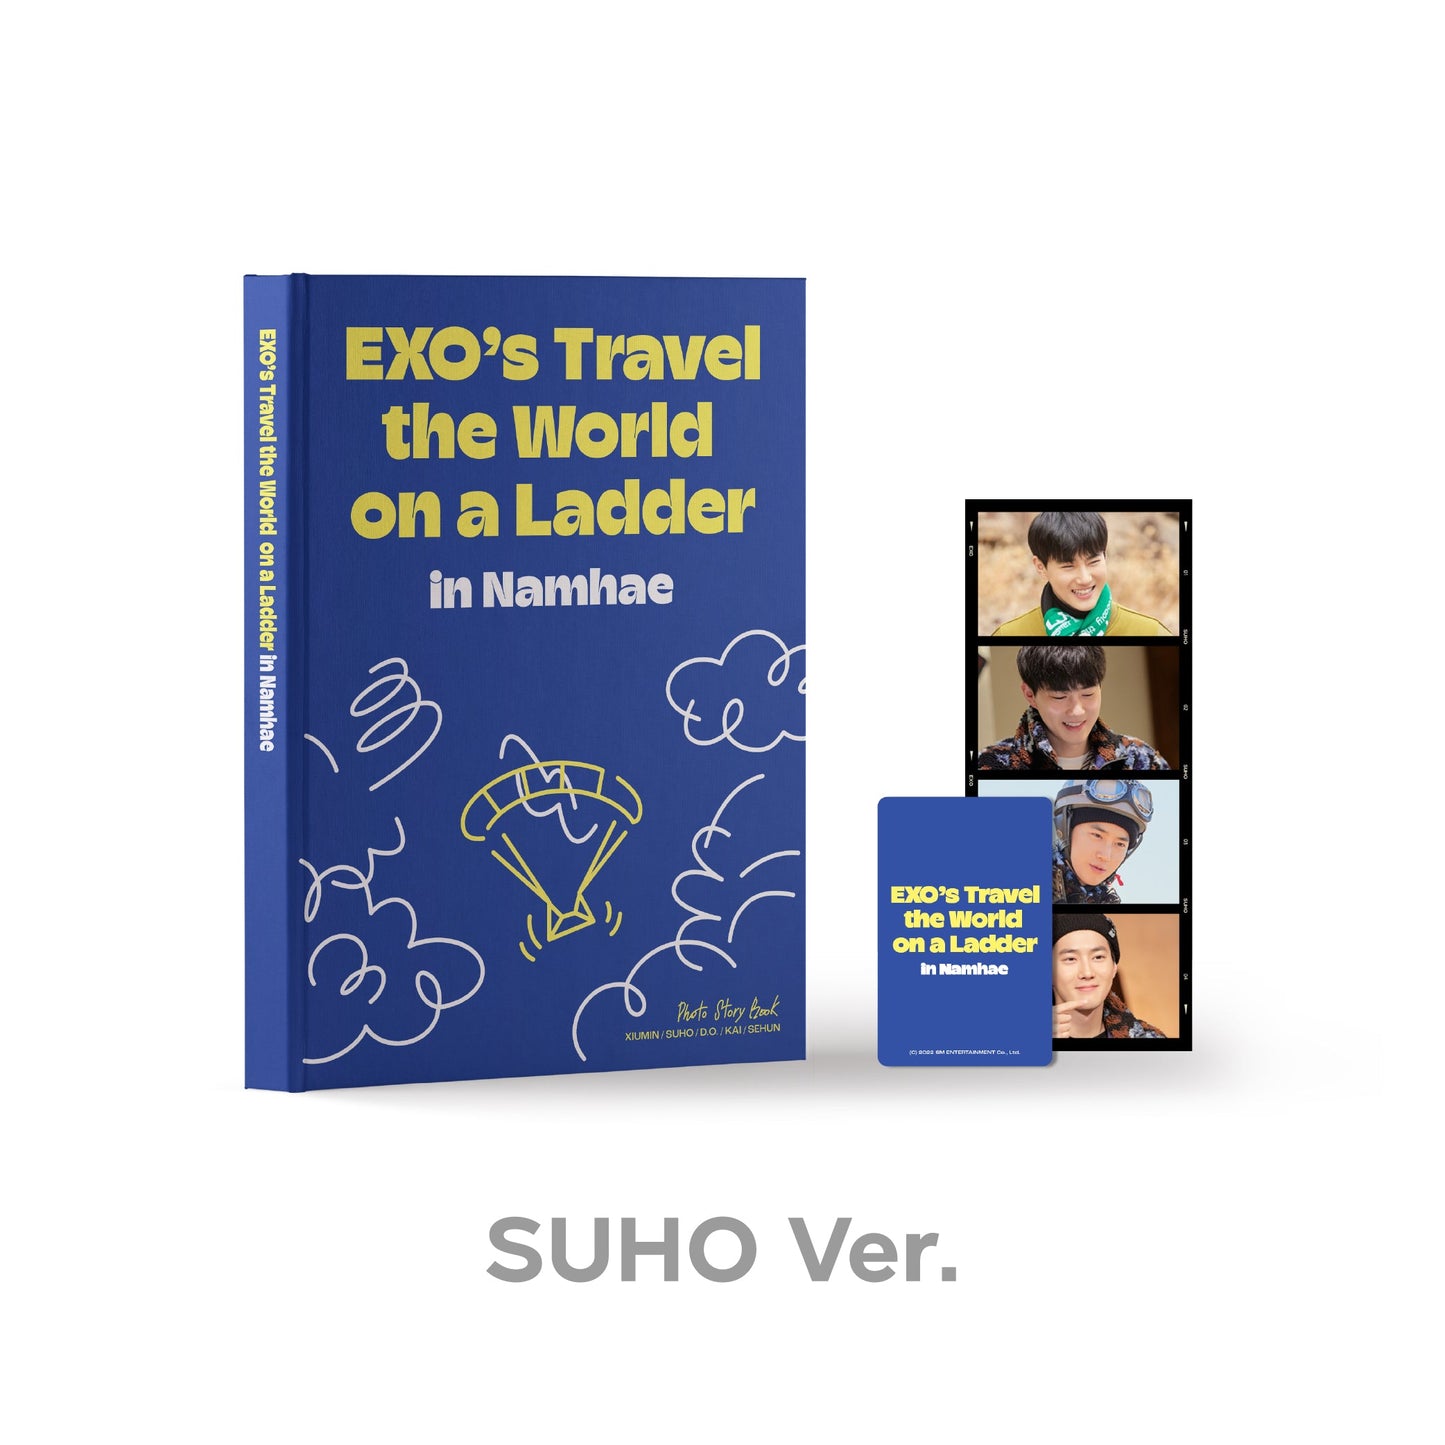 EXO 'EXO'S TRAVEL THE WORLD ON A LADDER IN NAMHAE' PHOTO STORY BOOK SUHO COVER